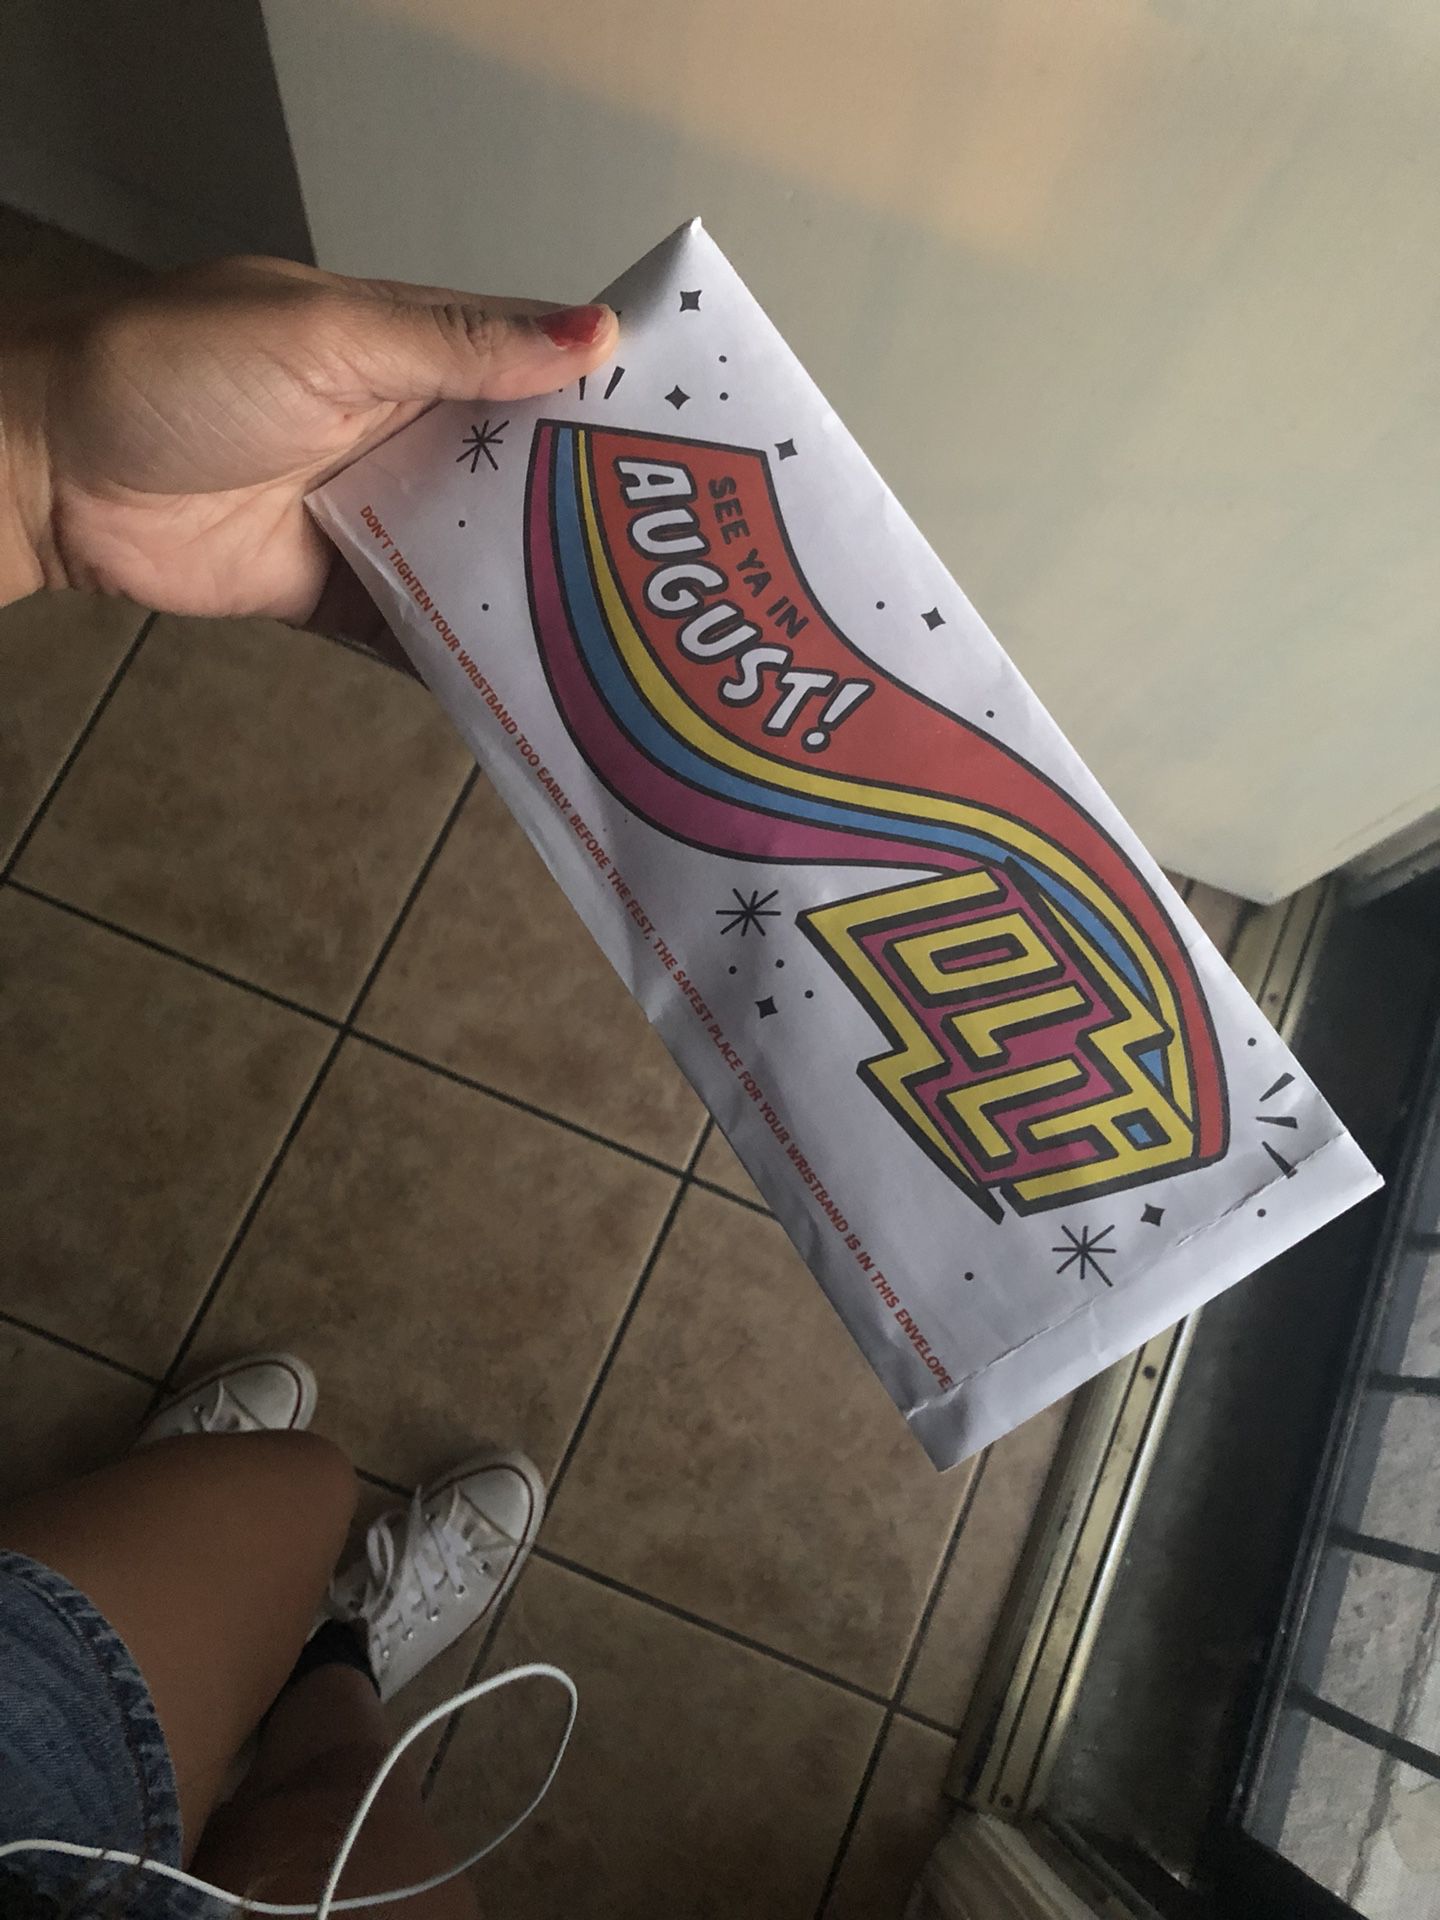 4 Day Lollapalooza Wristband For Sale